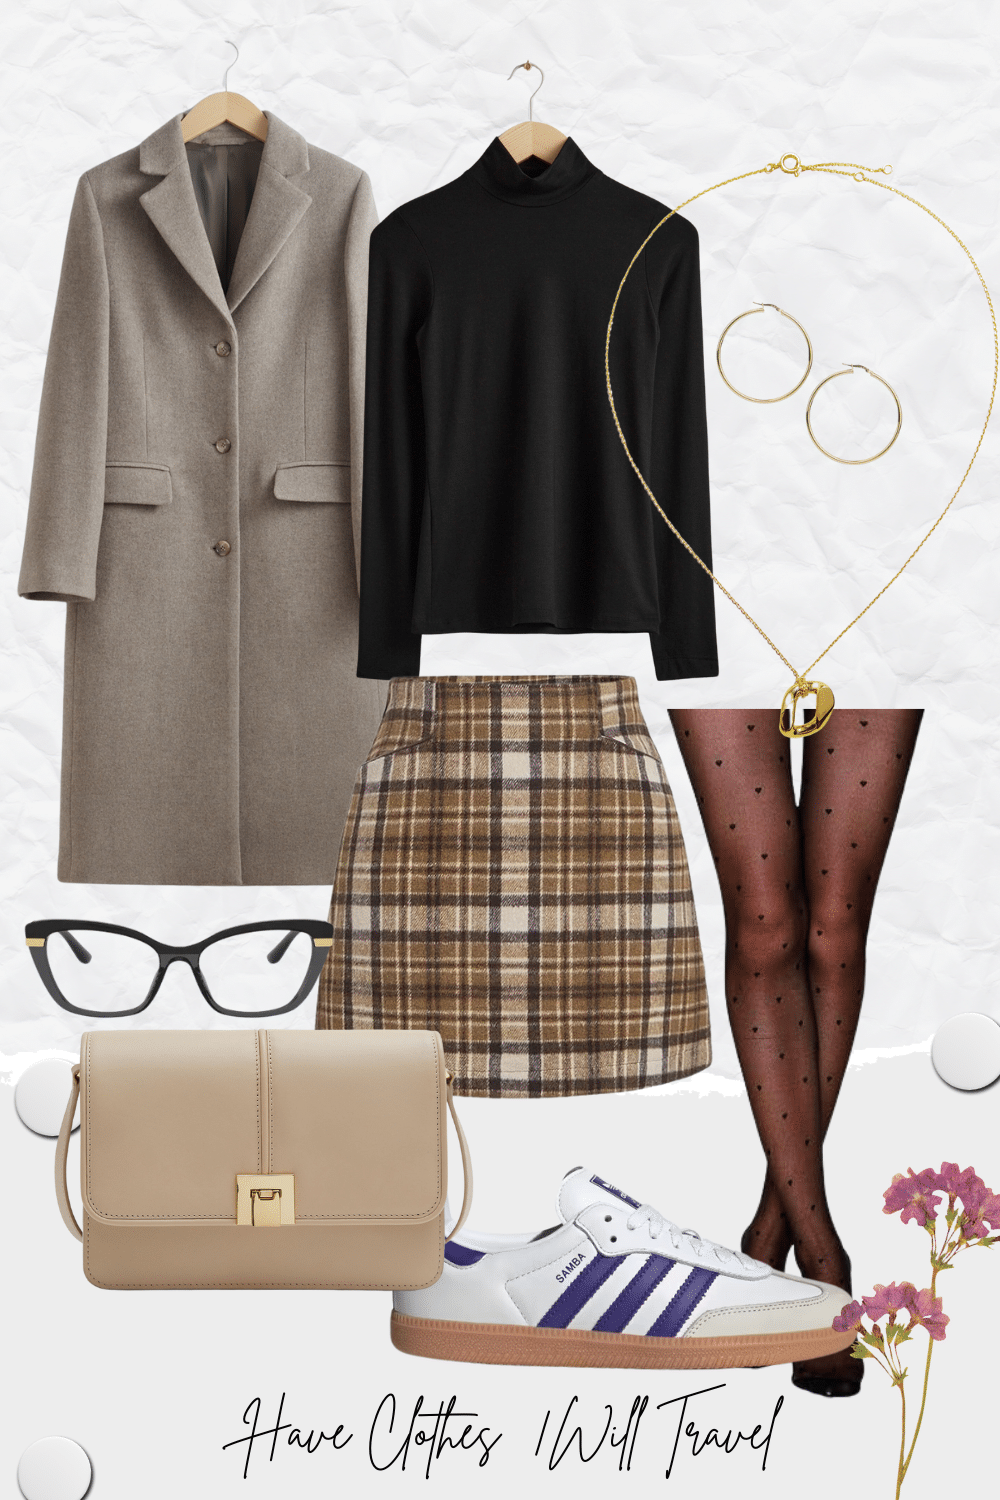 A fun mini skirt and black tights outfit featuring sneakers and eyeglasses